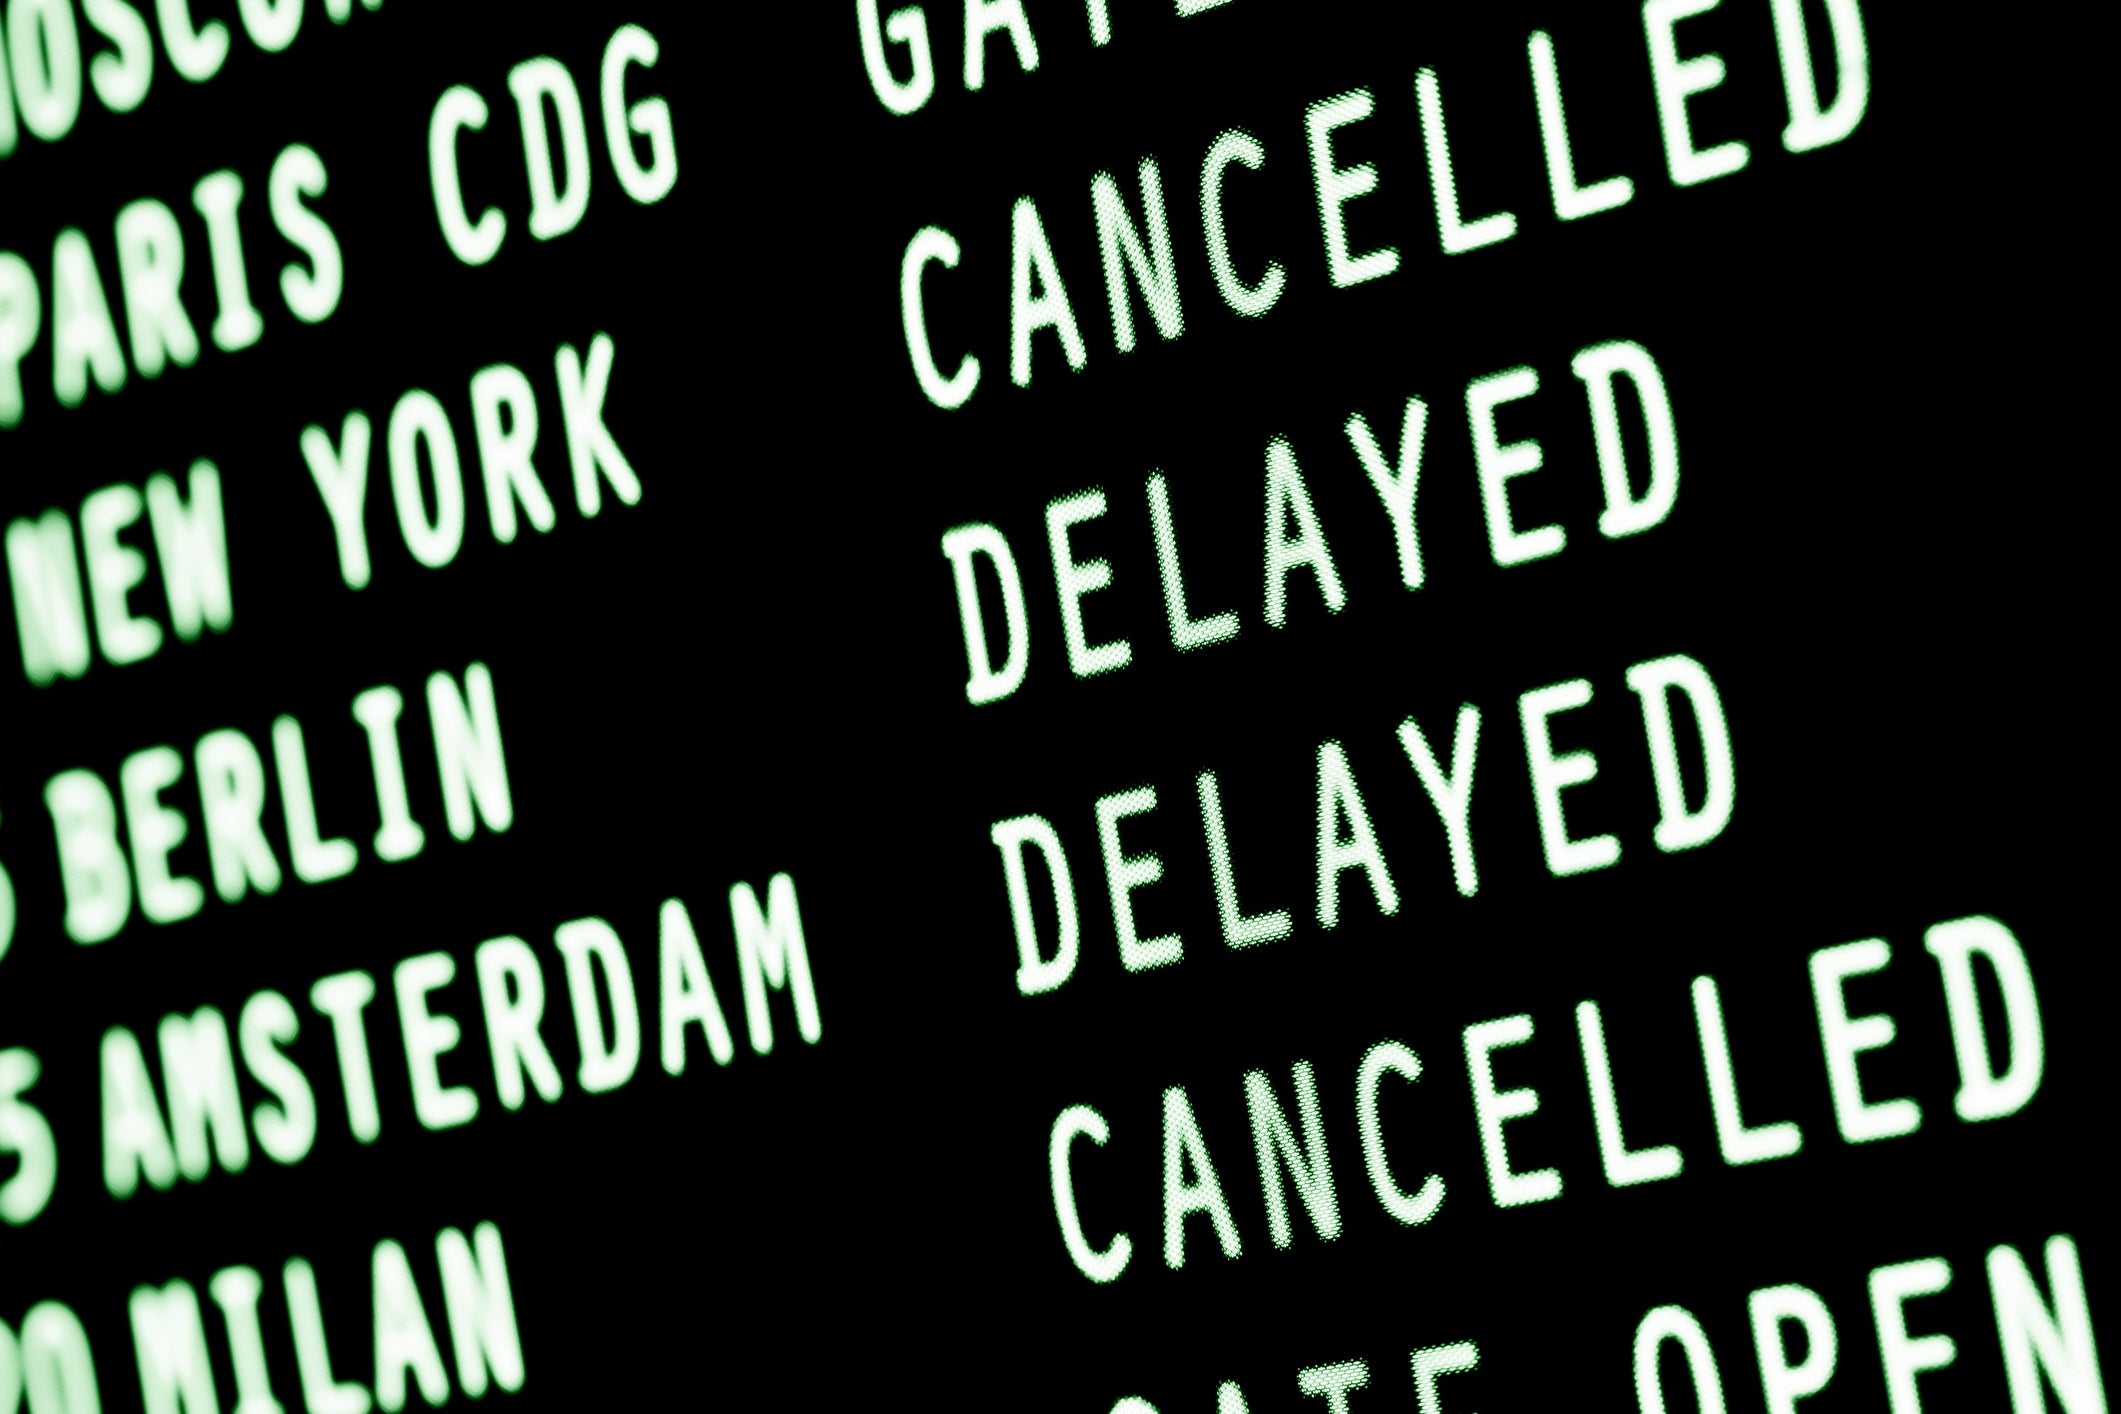 A sign shows names of cities with 'delayed' or 'cancelled' next to all of them